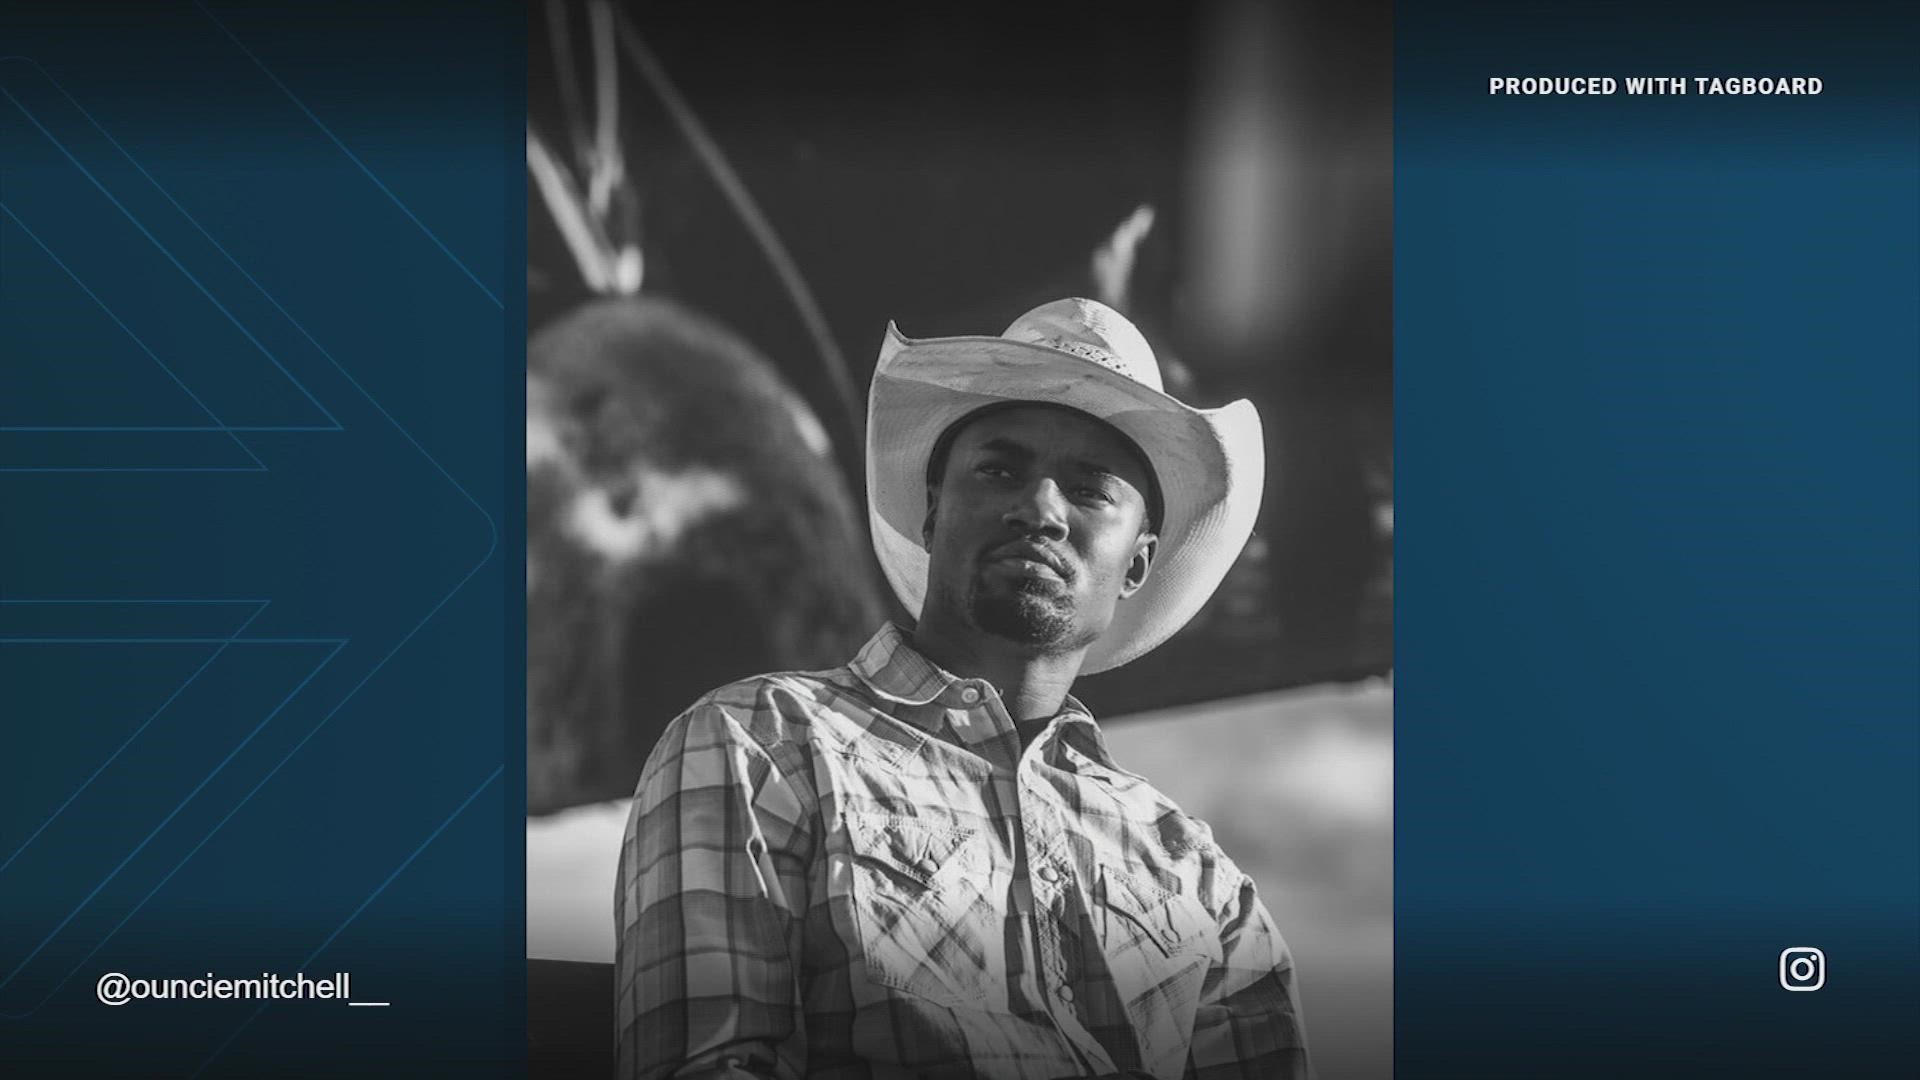 A pro bull rider from Fresno, Texas was killed in Utah overnight Monday in what Salt Lake City police are calling a domestic violence homicide.